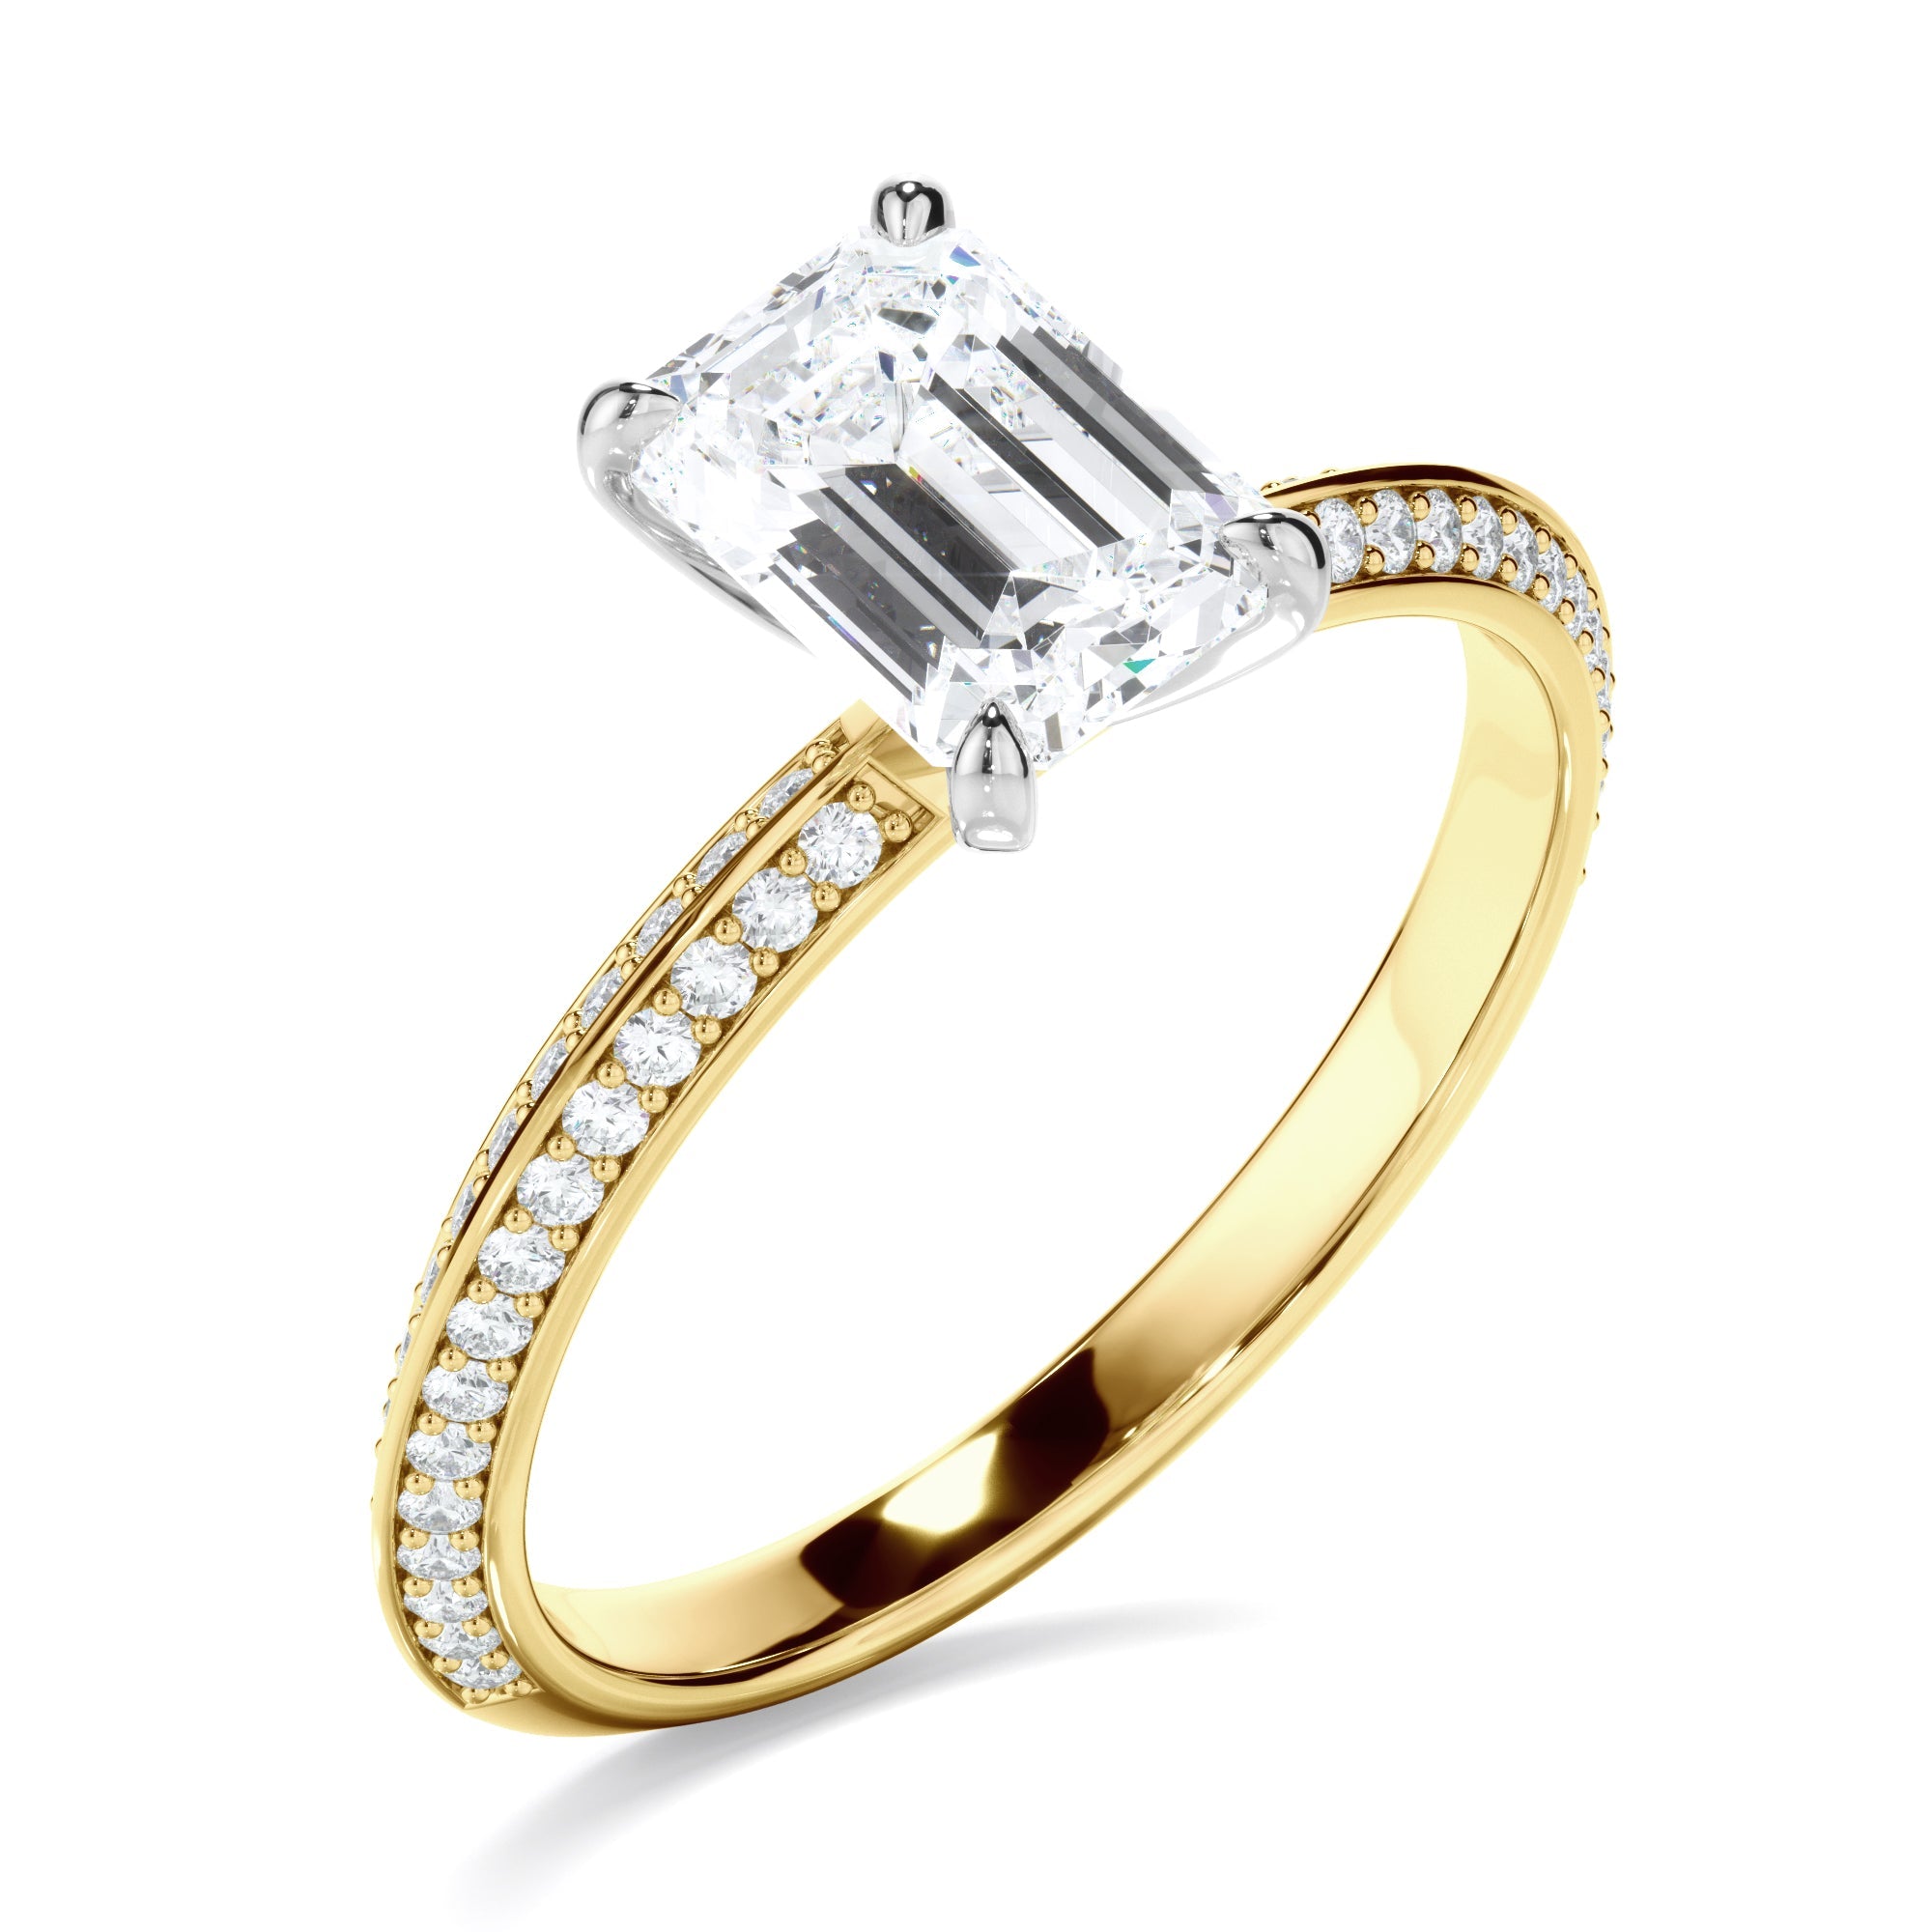 Emerald Cut Diamond Knife Edge Engagement Ring With Diamond Pave Sides